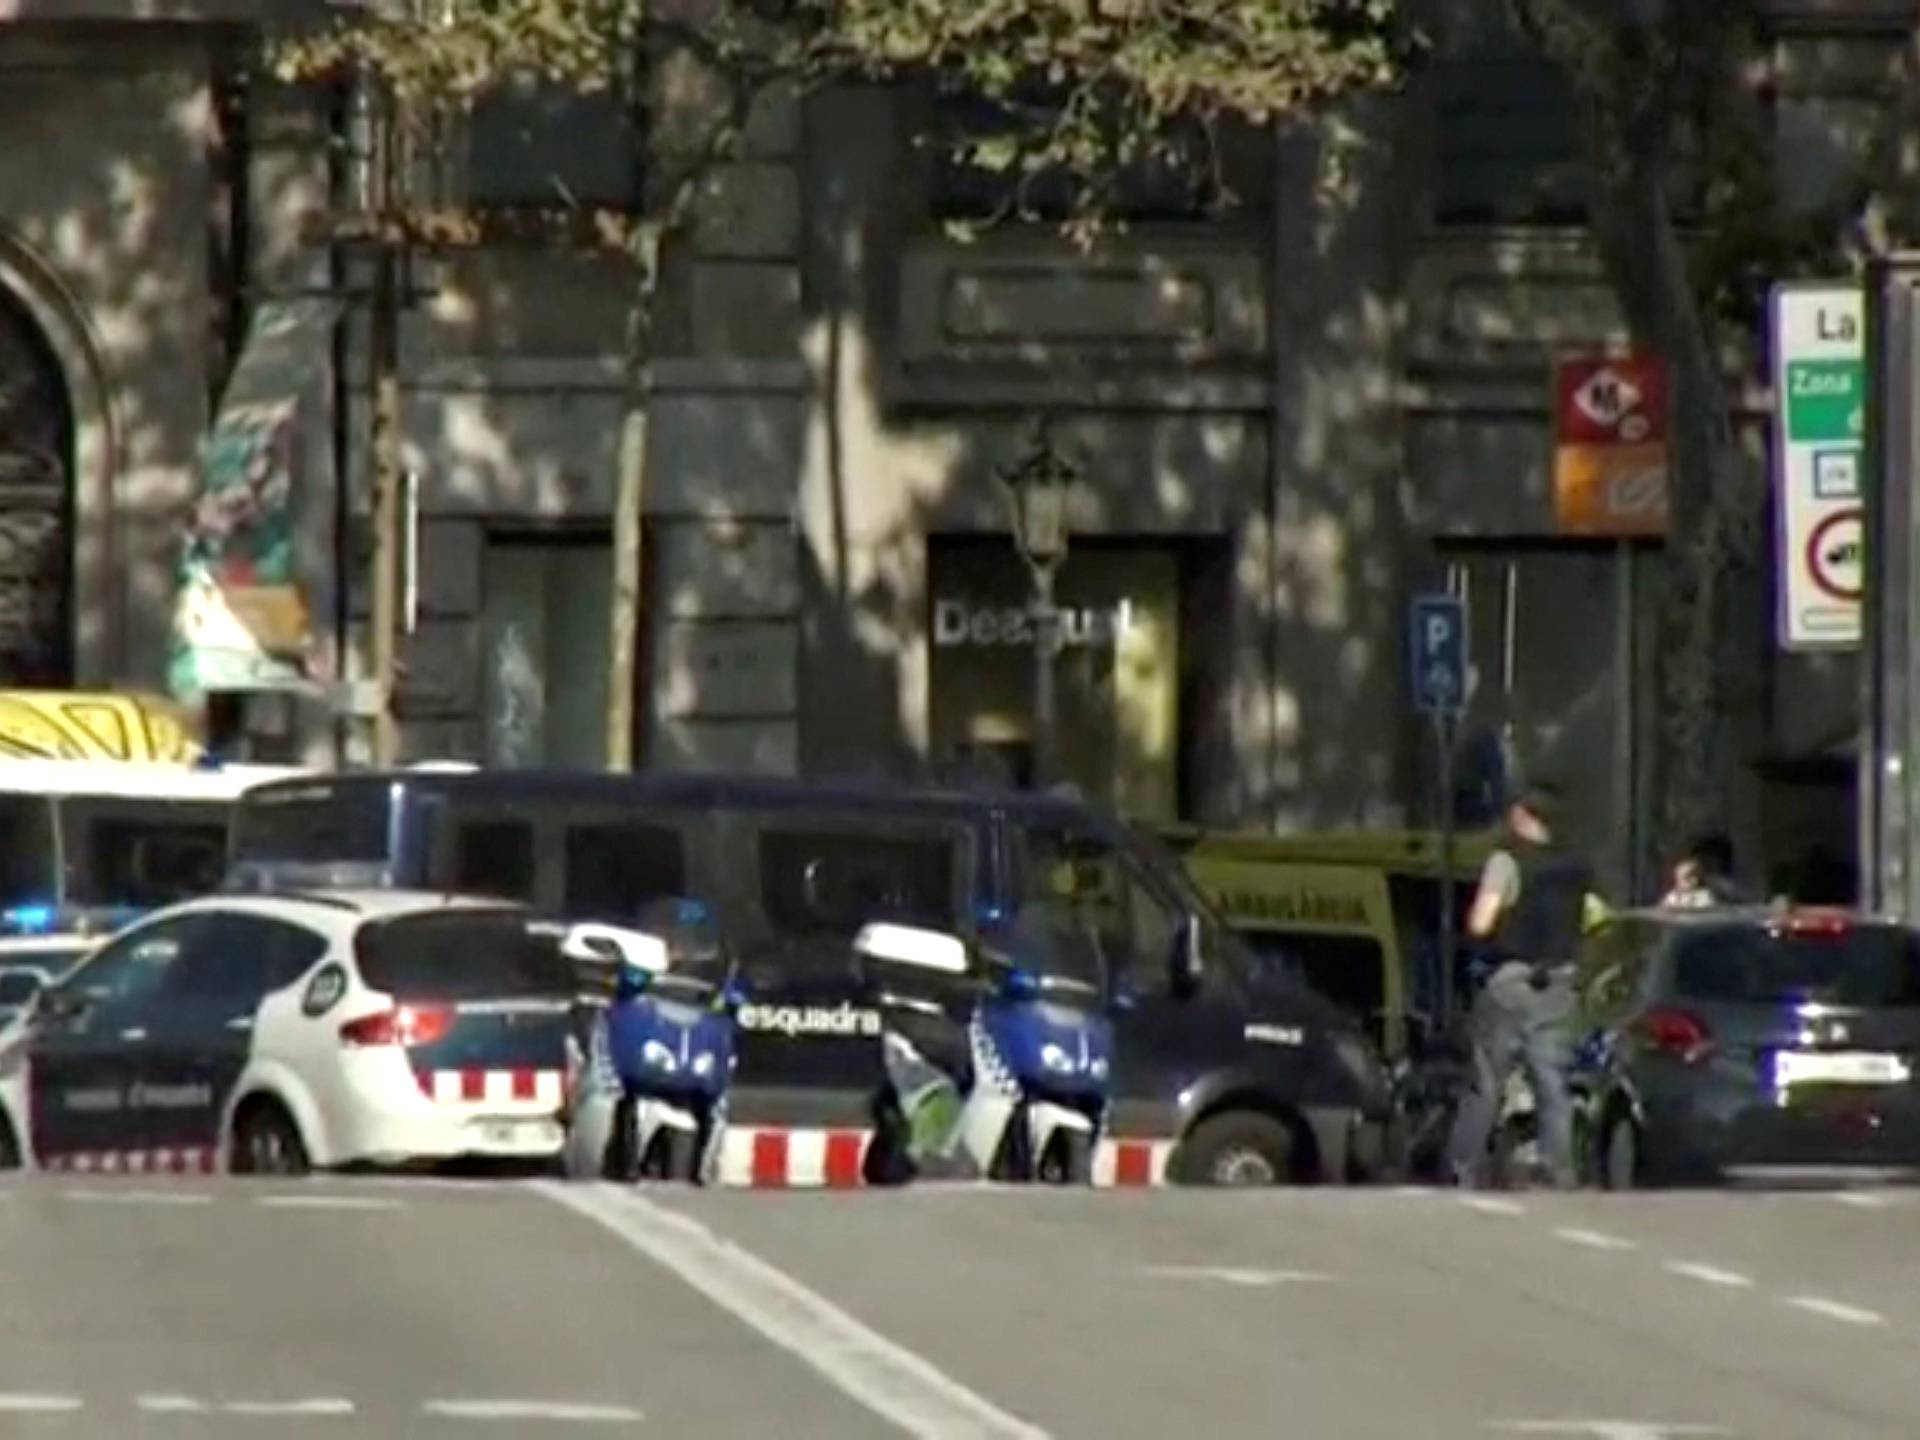 A still image from video shows a police cordon on a street in Barcelona, Spain following a van crash